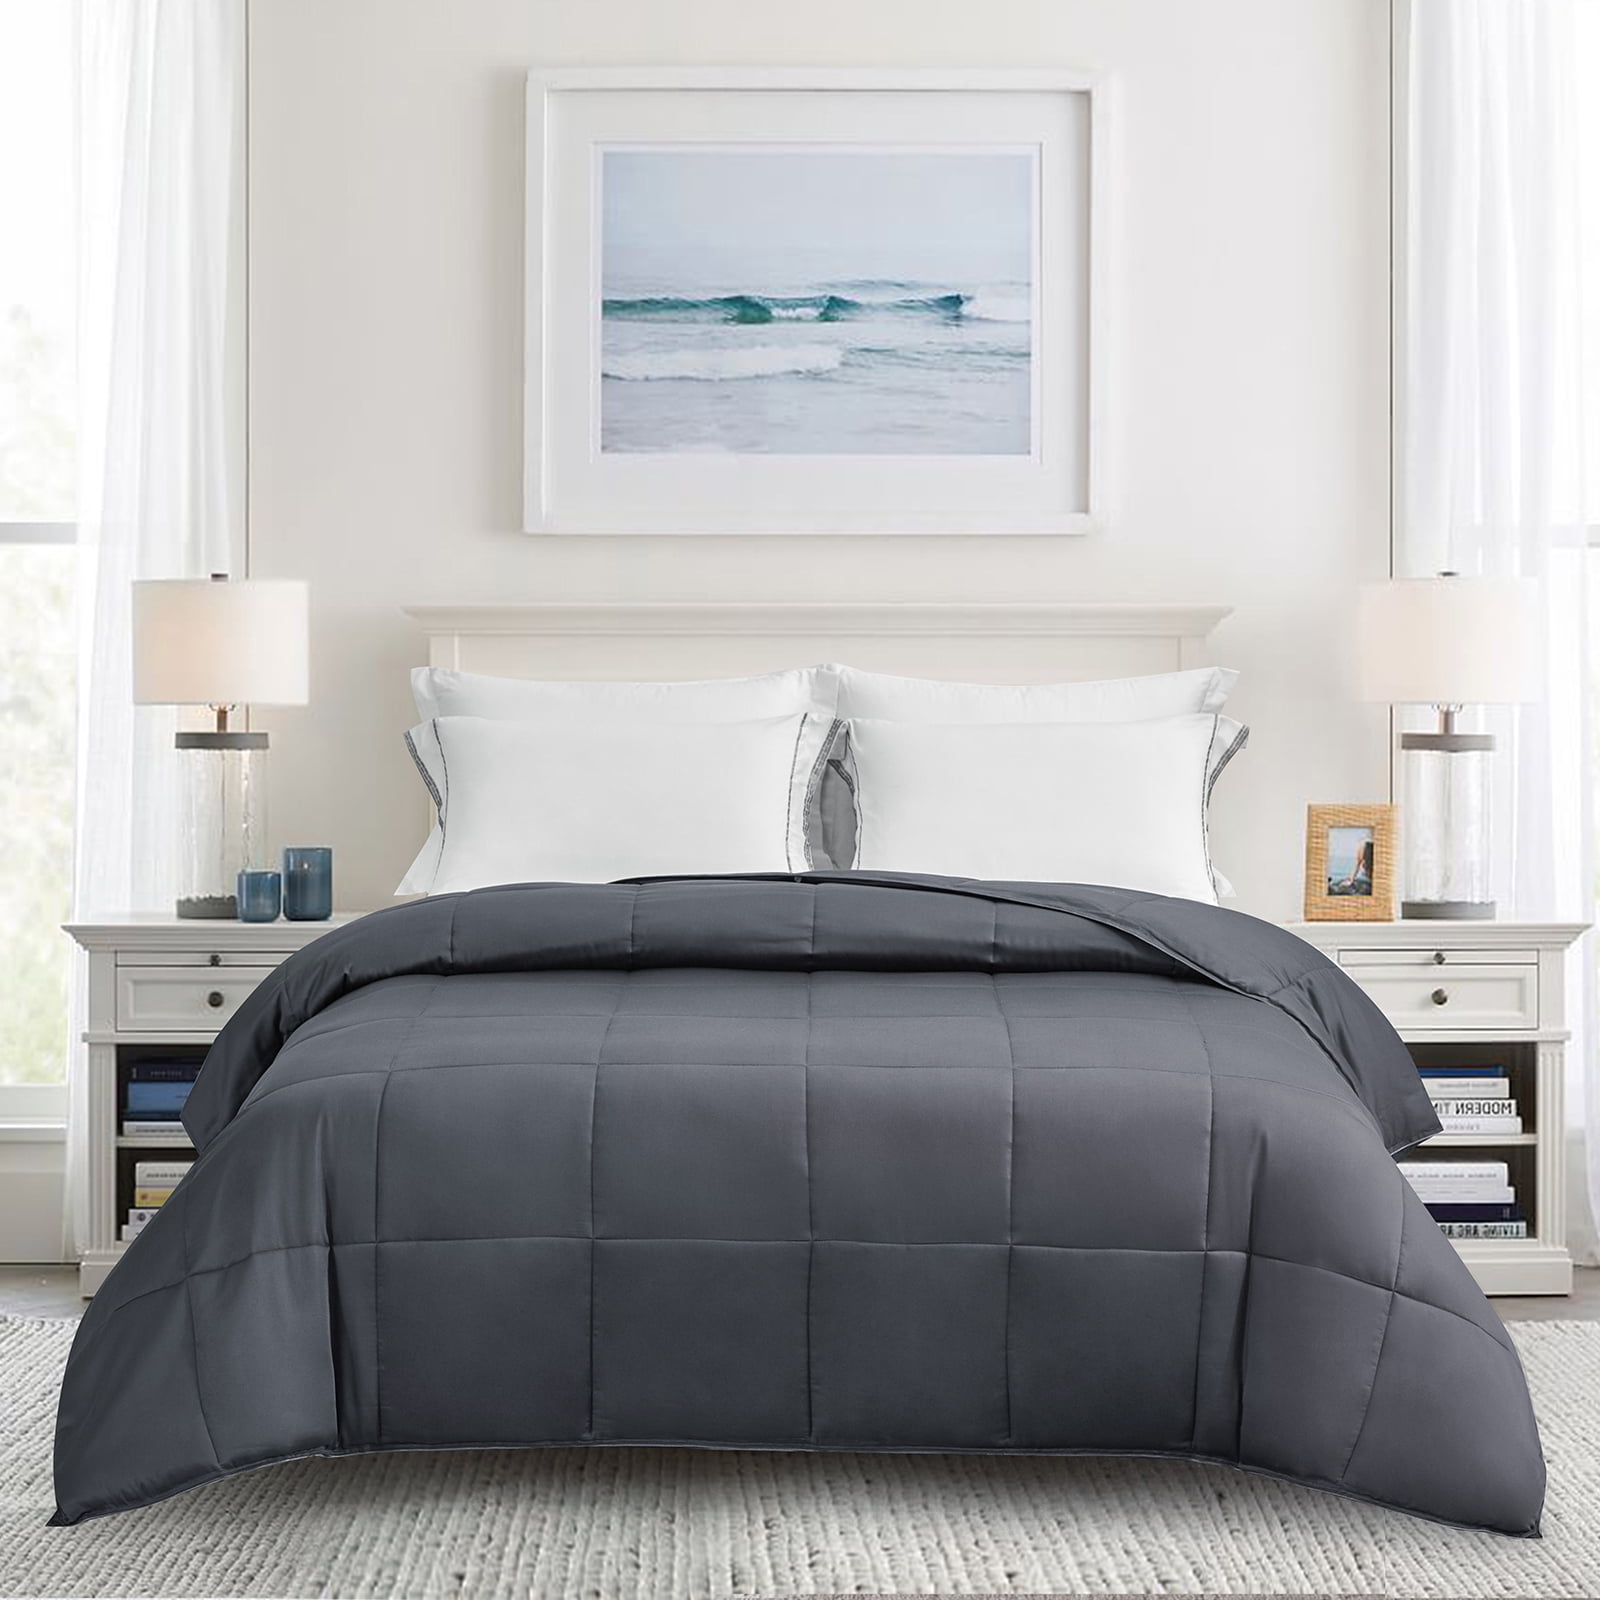 Soft,Lightweight and Machine Washable Exclusivo Mezcla Queen Size Down Alternative Comforter Quilted Duvet Insert with Corner Tabs for All Seasons 88x 88, Grey